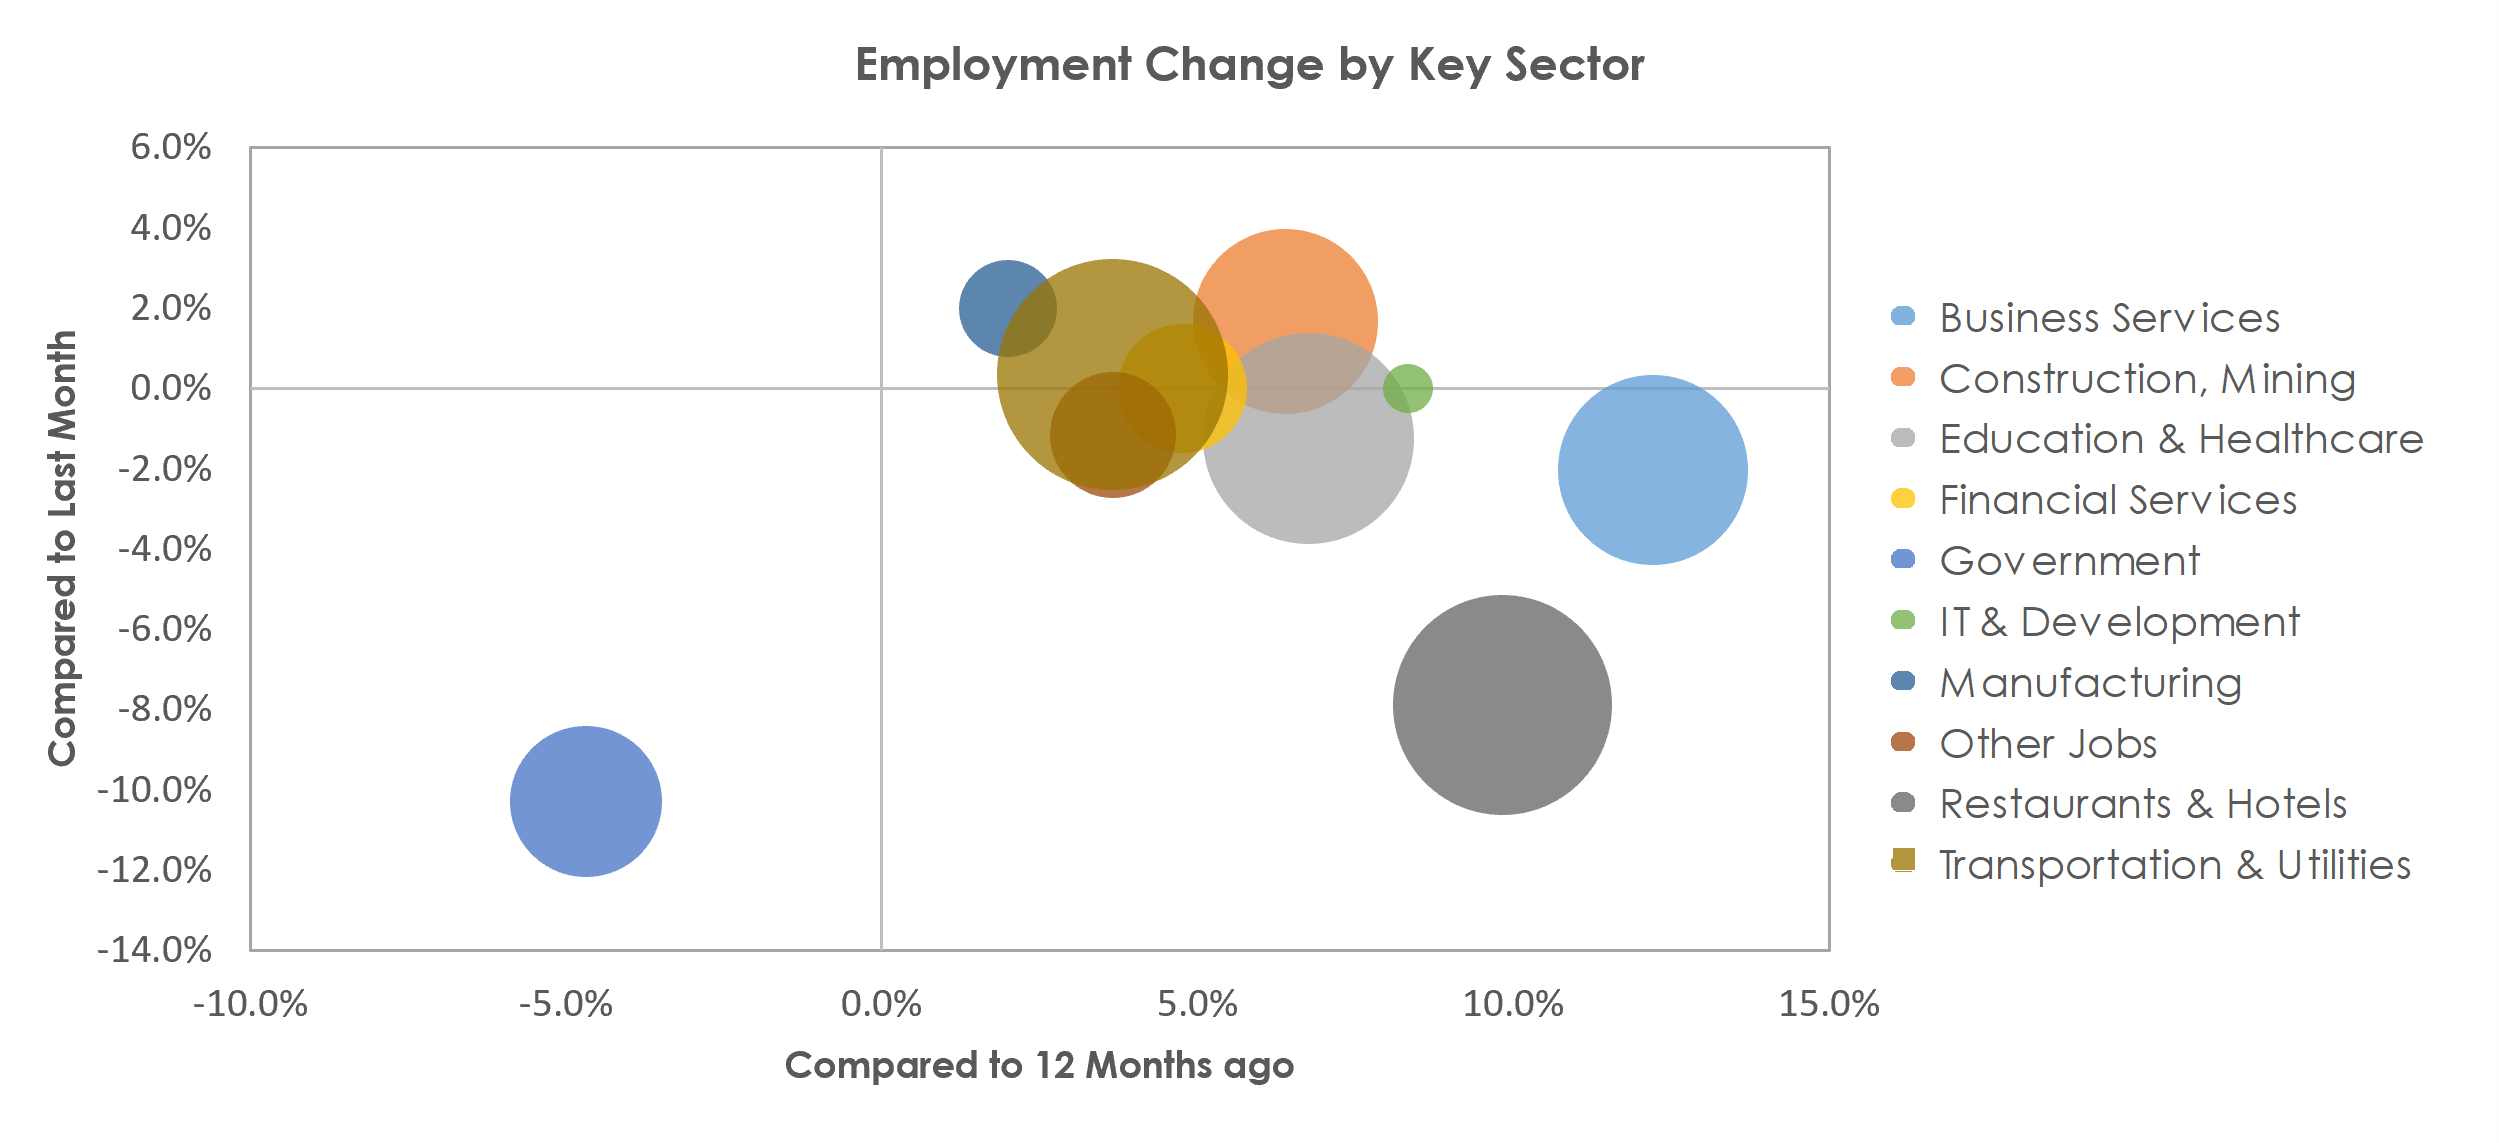 Naples-Immokalee-Marco Island, FL Unemployment by Industry June 2021